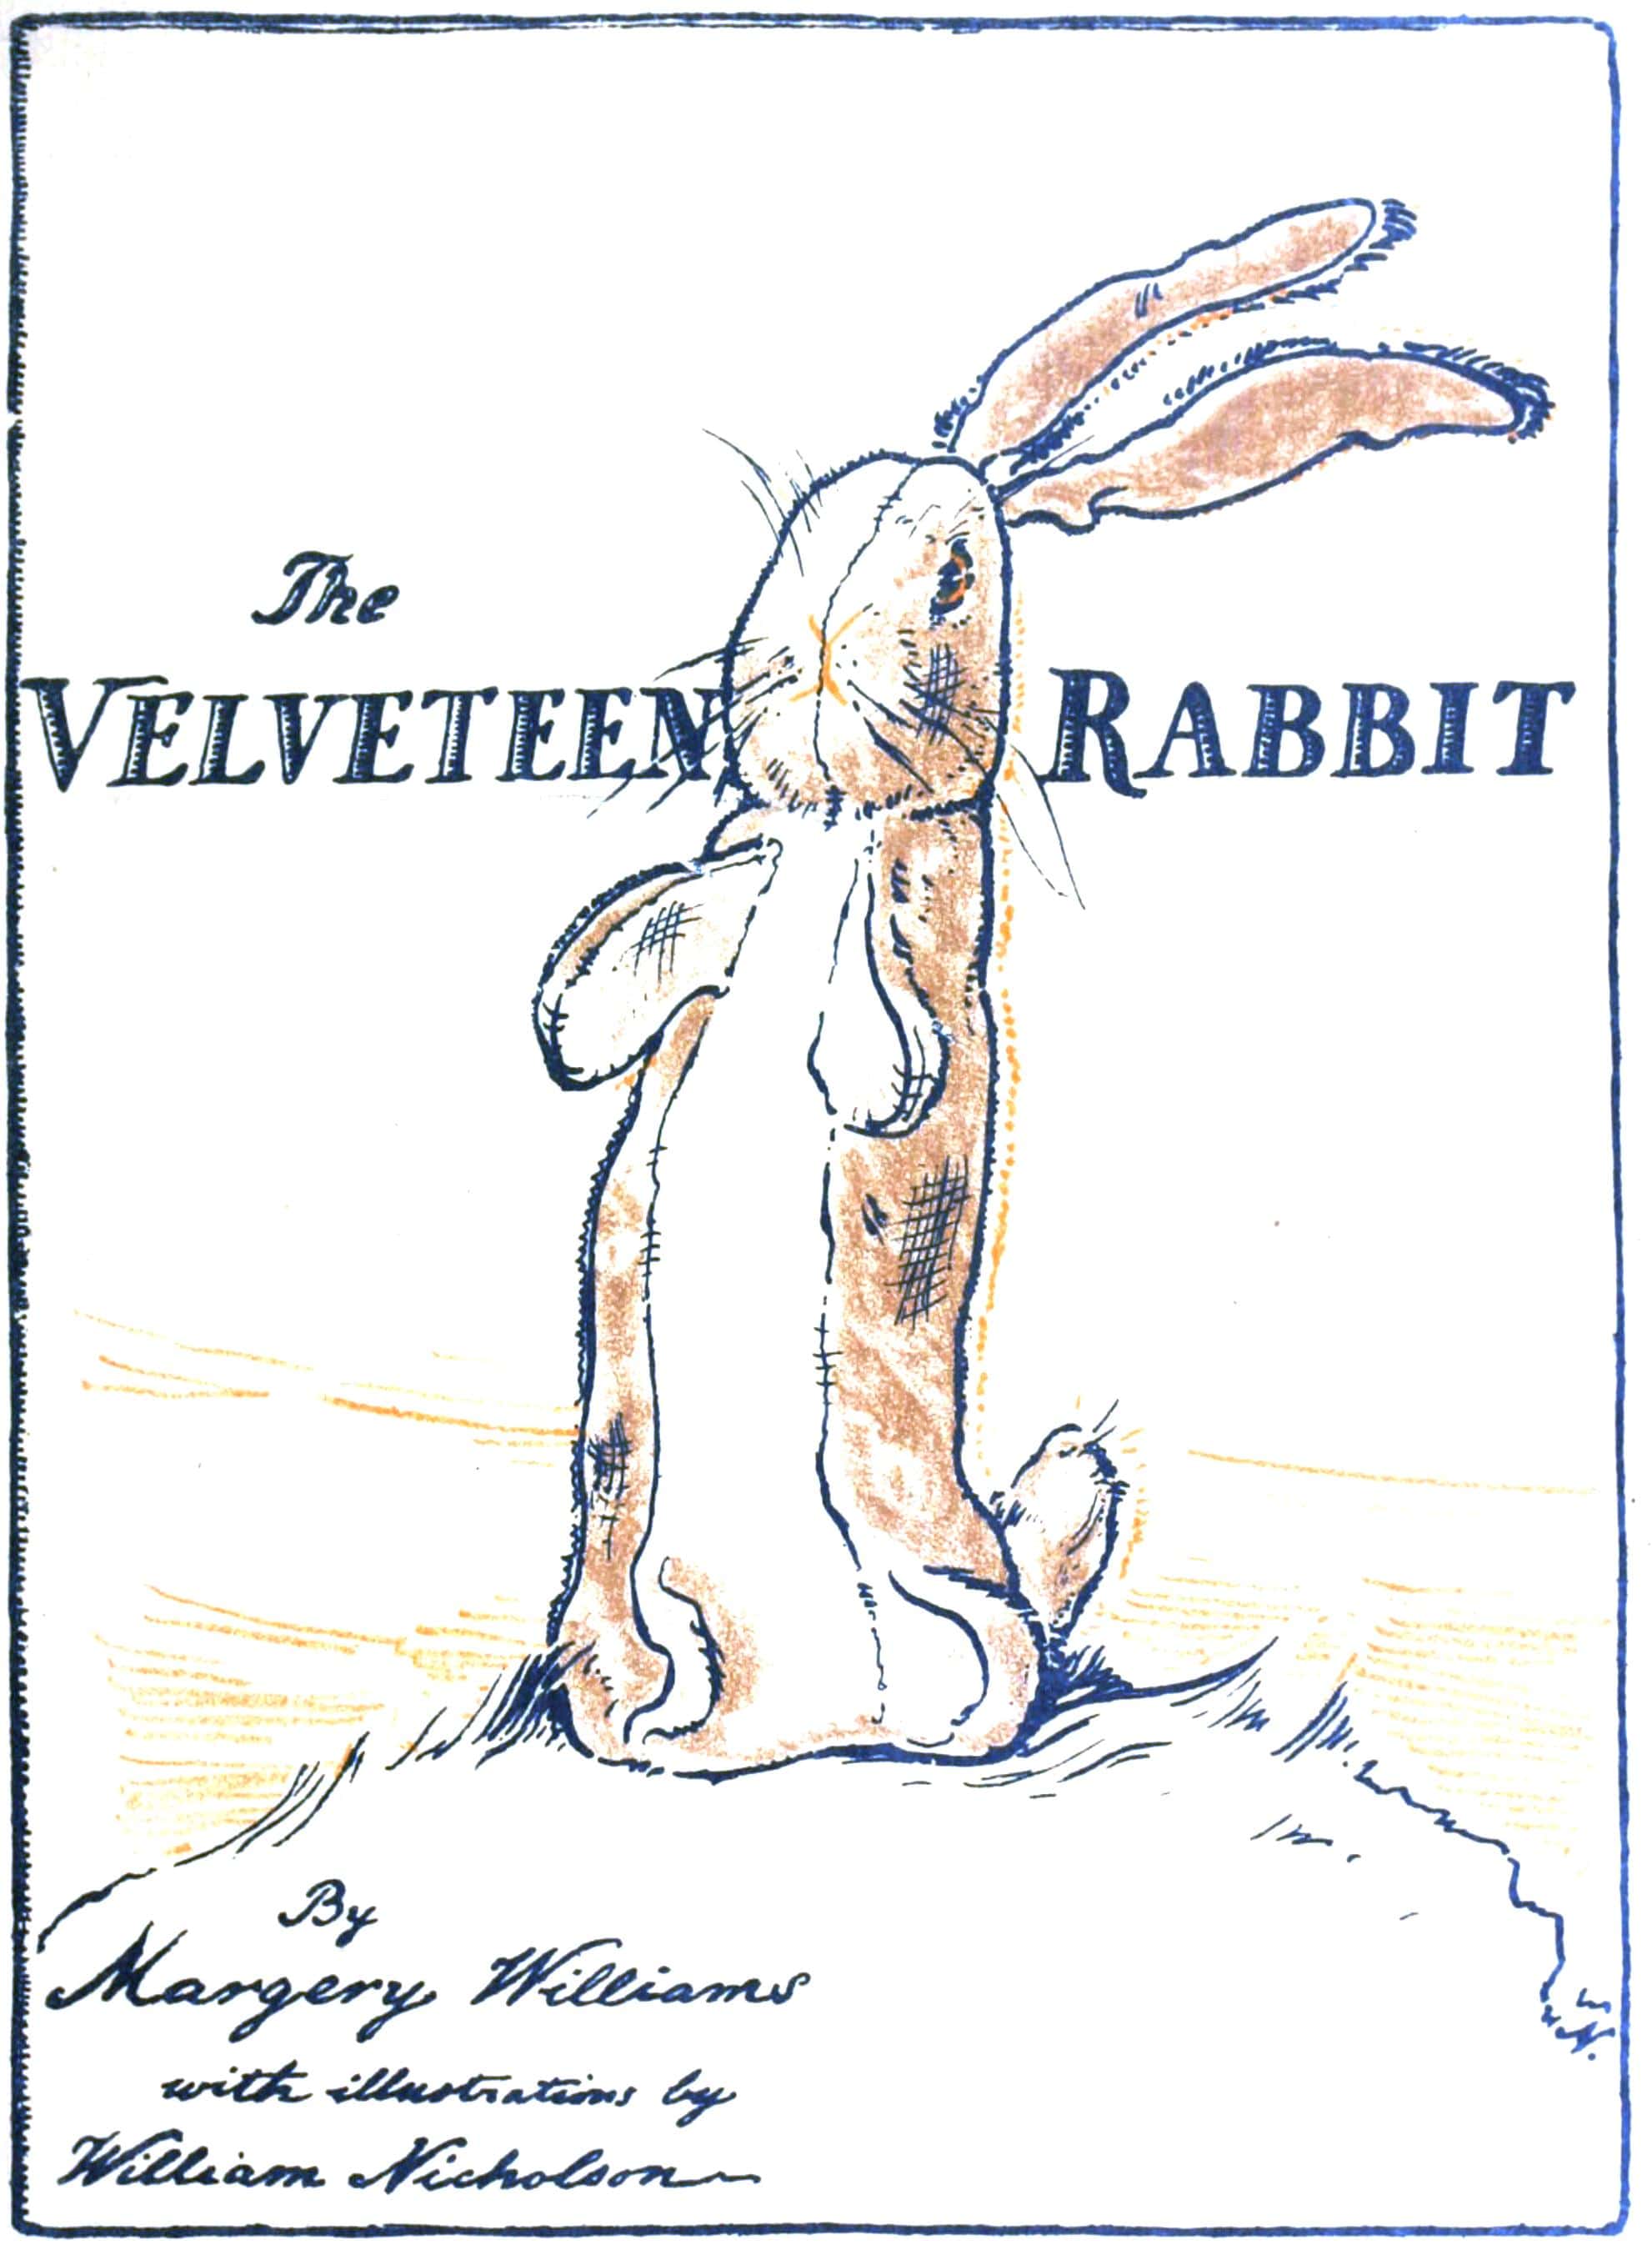 Cover to the 1922 first edition of The Velveteen Rabbit, showing the titular stuffed toy sitting upright on a white background